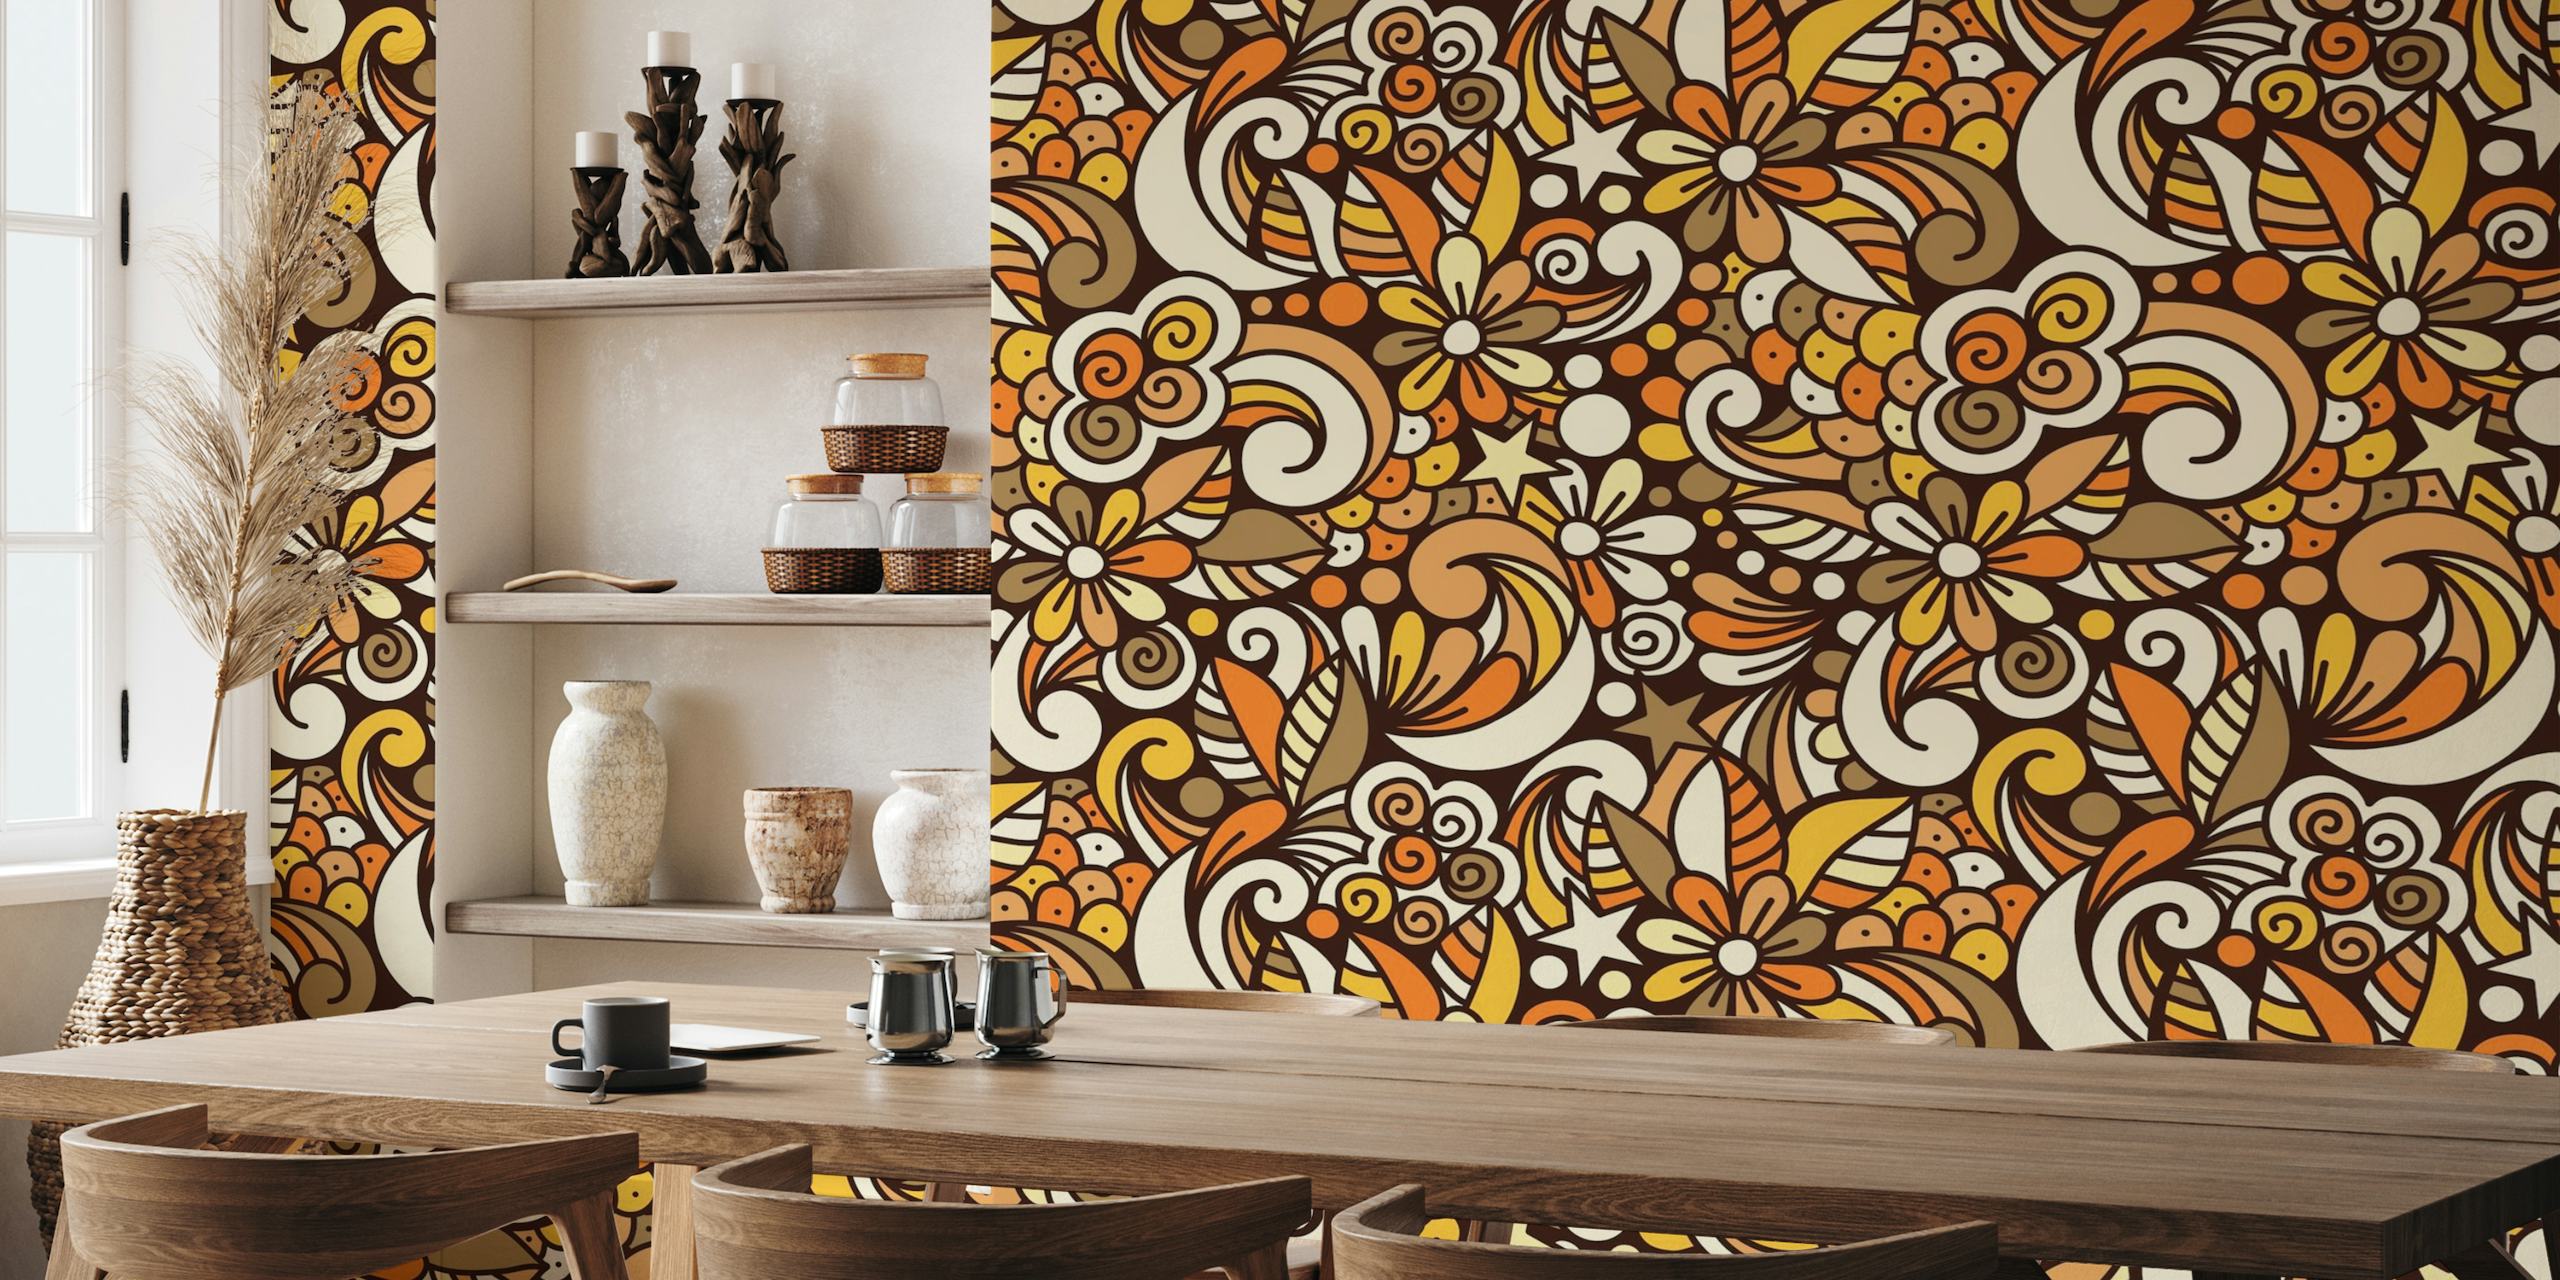 Groovy floral retro doodle, yellow - brown (2753G) ταπετσαρία